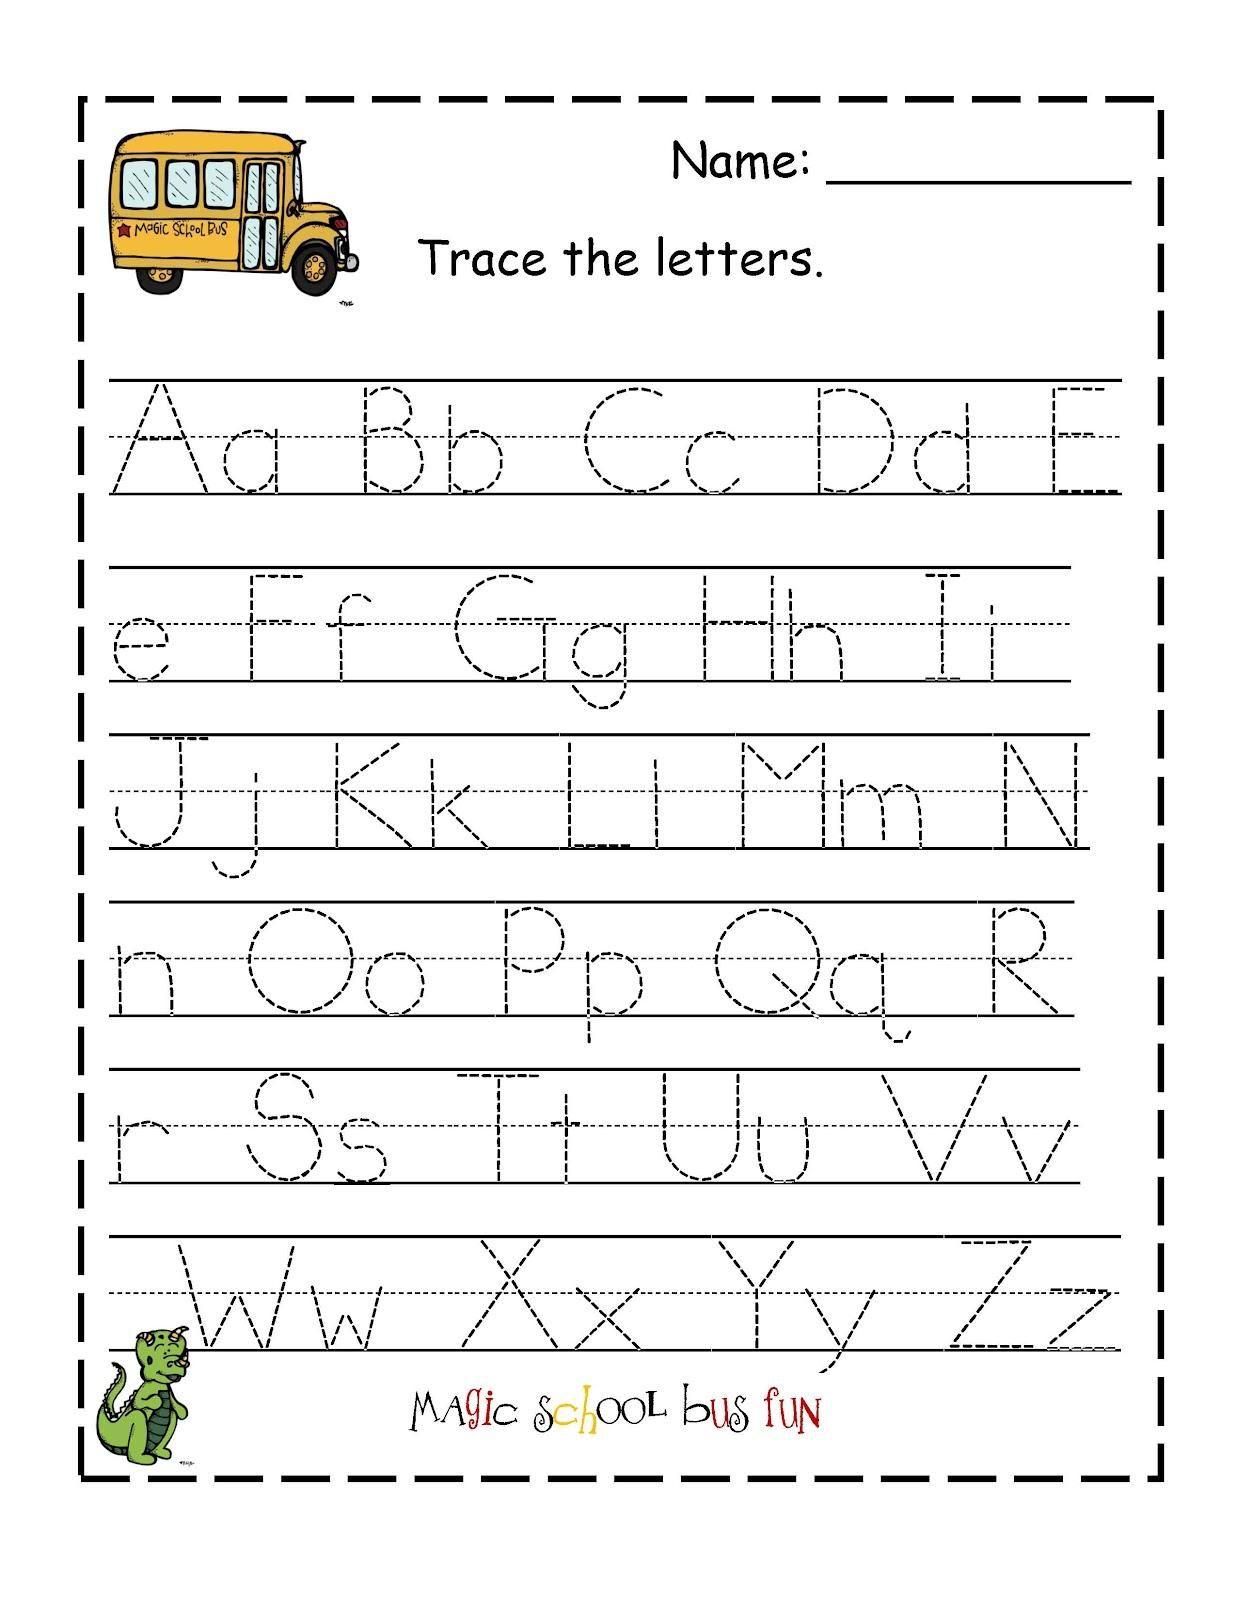 Free Printable Abc Tracing Worksheets #2 | Preschool with Alphabet Letters Worksheets Tracing